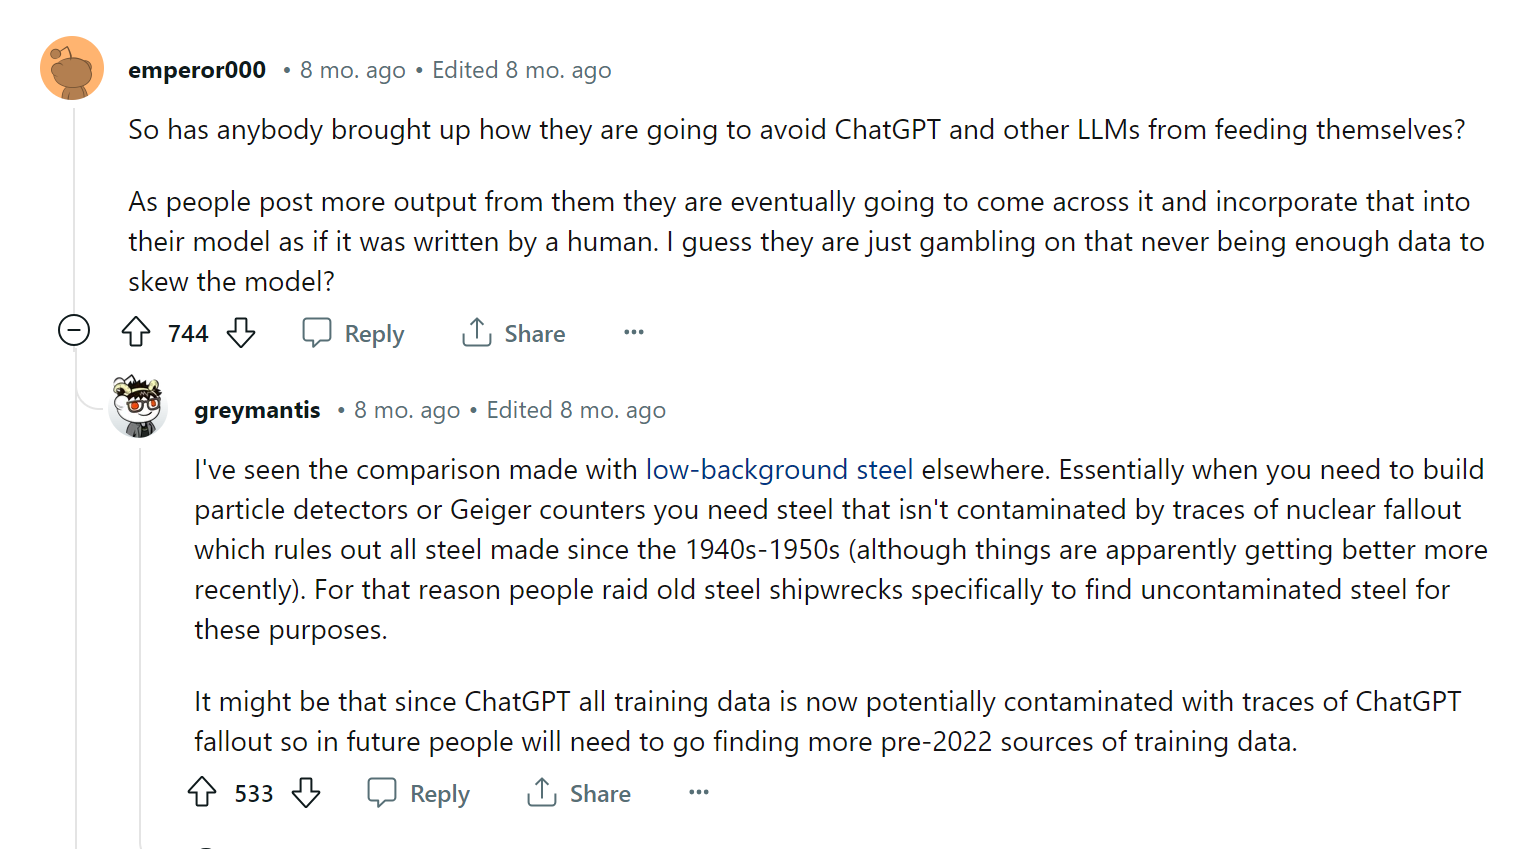 Reddit discussion about ChatGPT